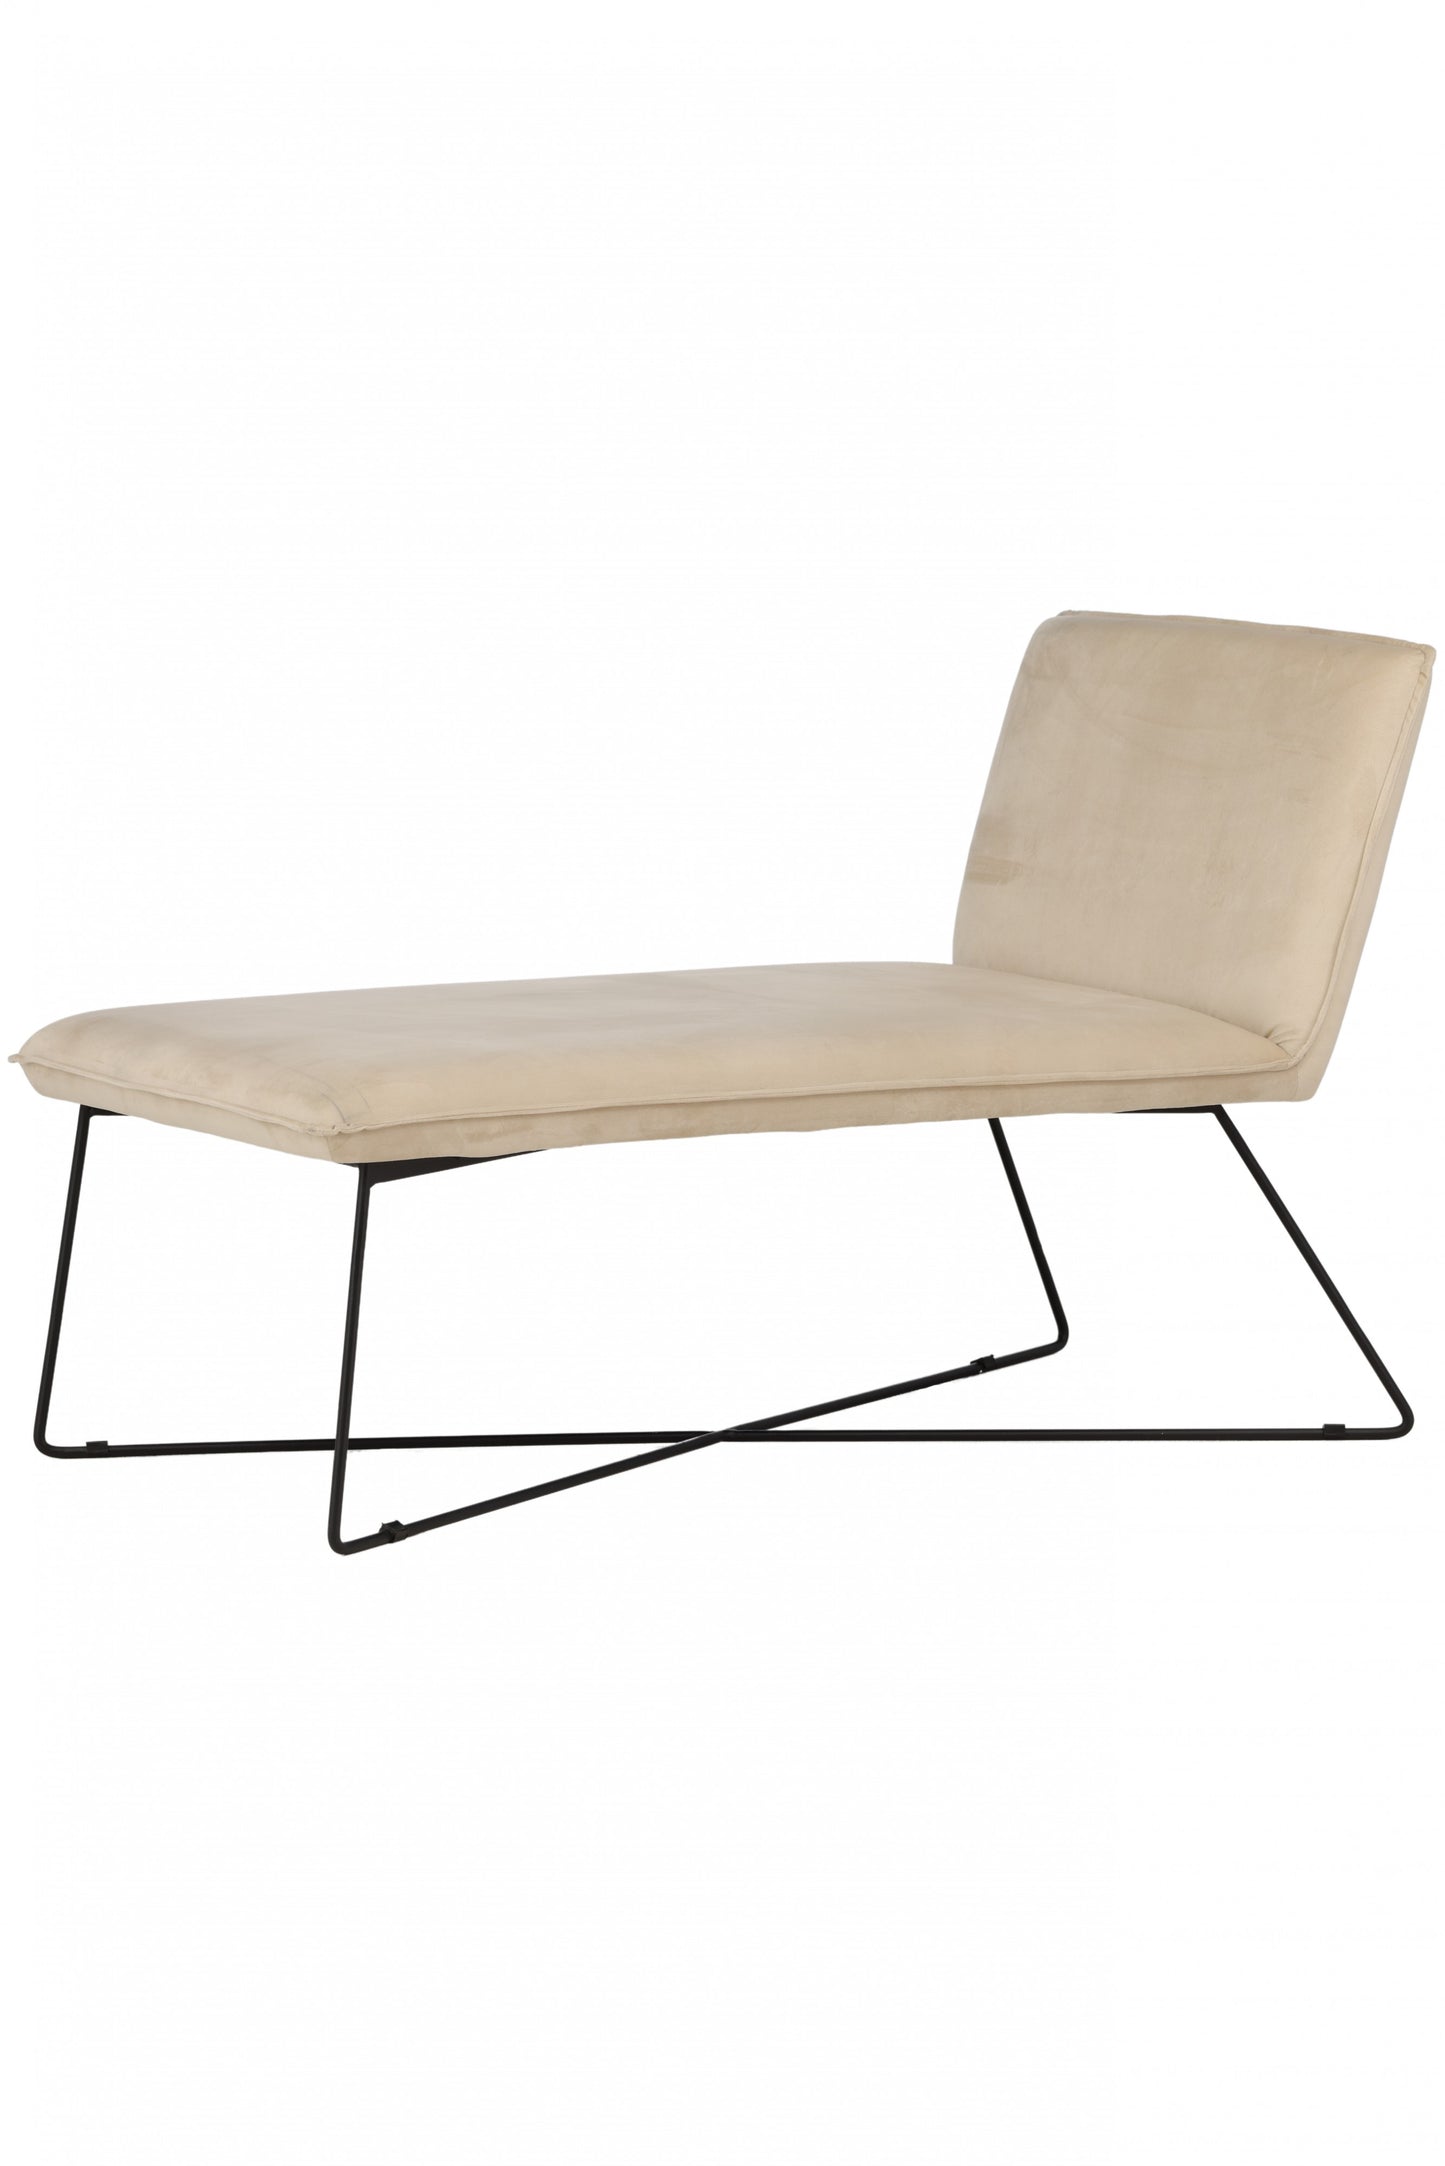 X-lounge Daybed - Sort / Beige Velour